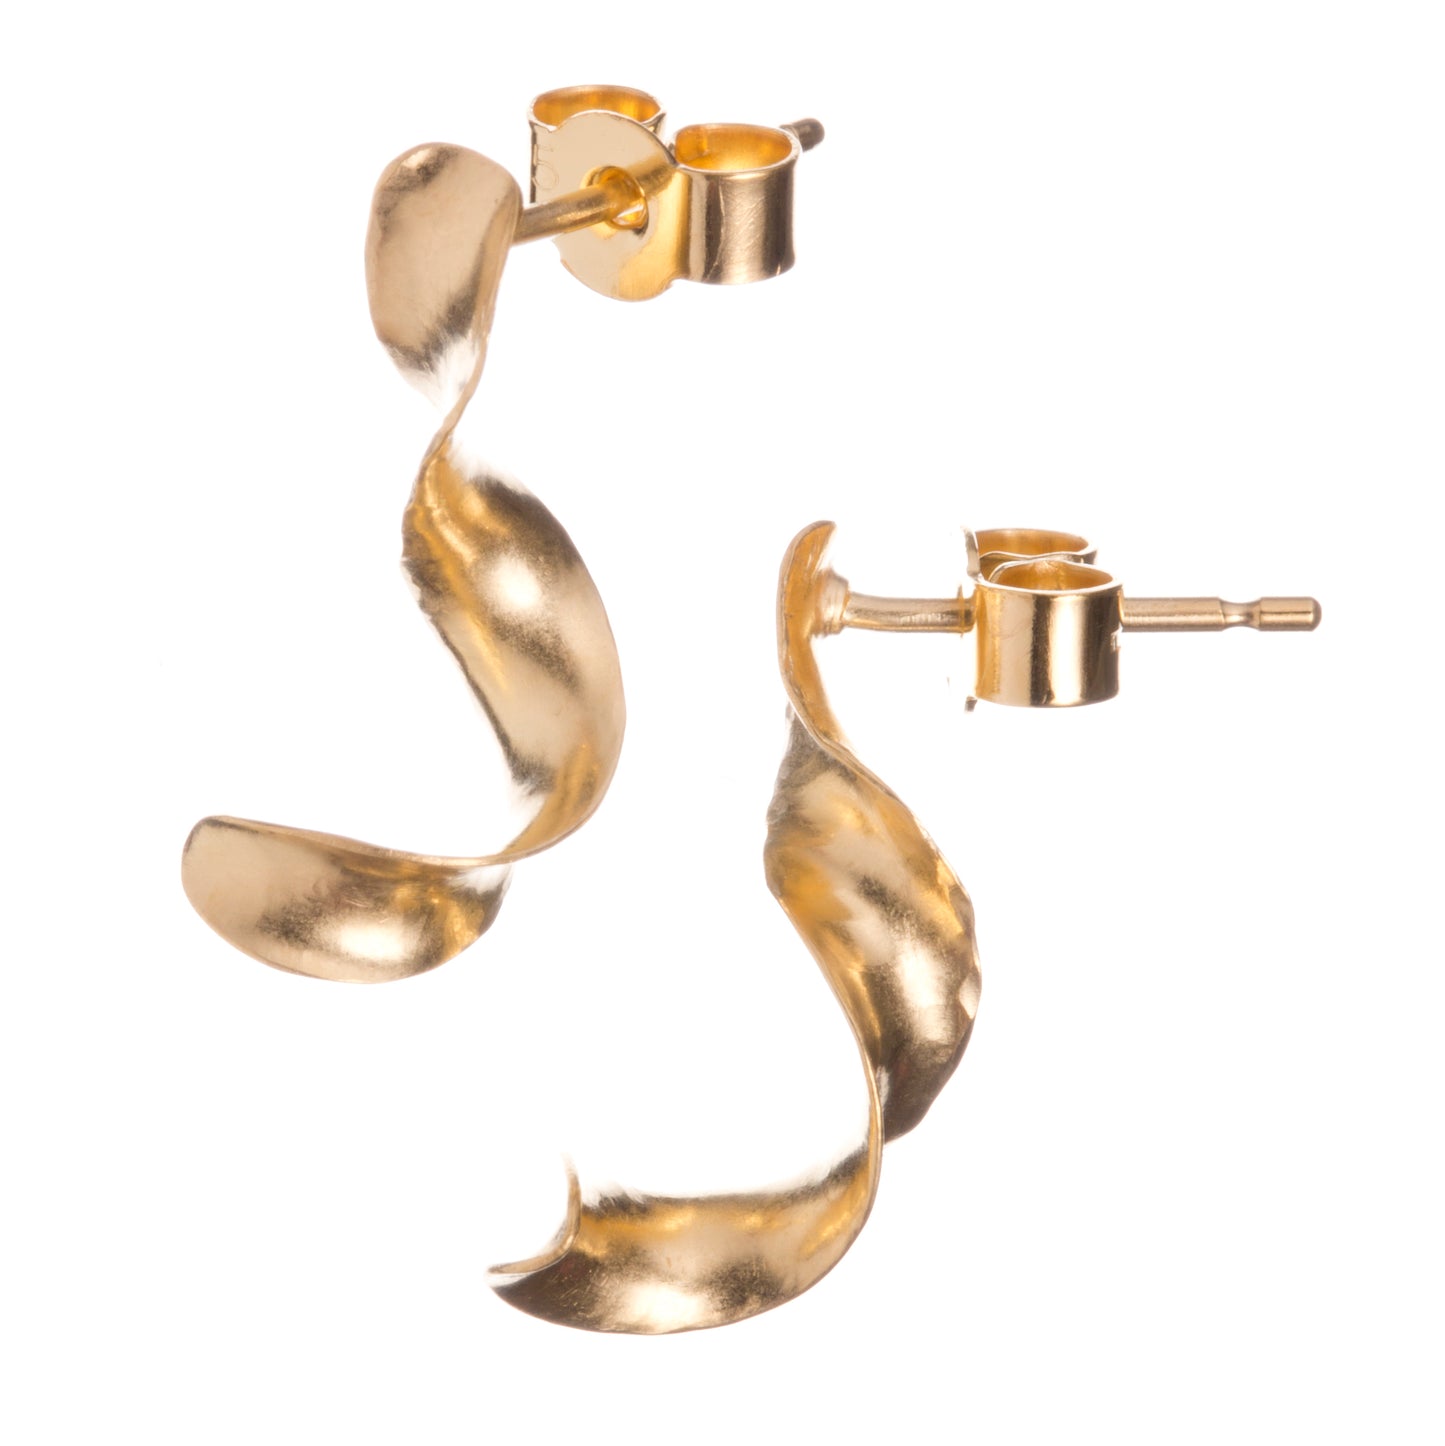 A pair of twisted earrings in sterling silver thickly plated with yellow gold. They measure about 1.8cm in length. The curly earrings are made by anticlastic raising, which creates simultaneous curves in opposing planes.